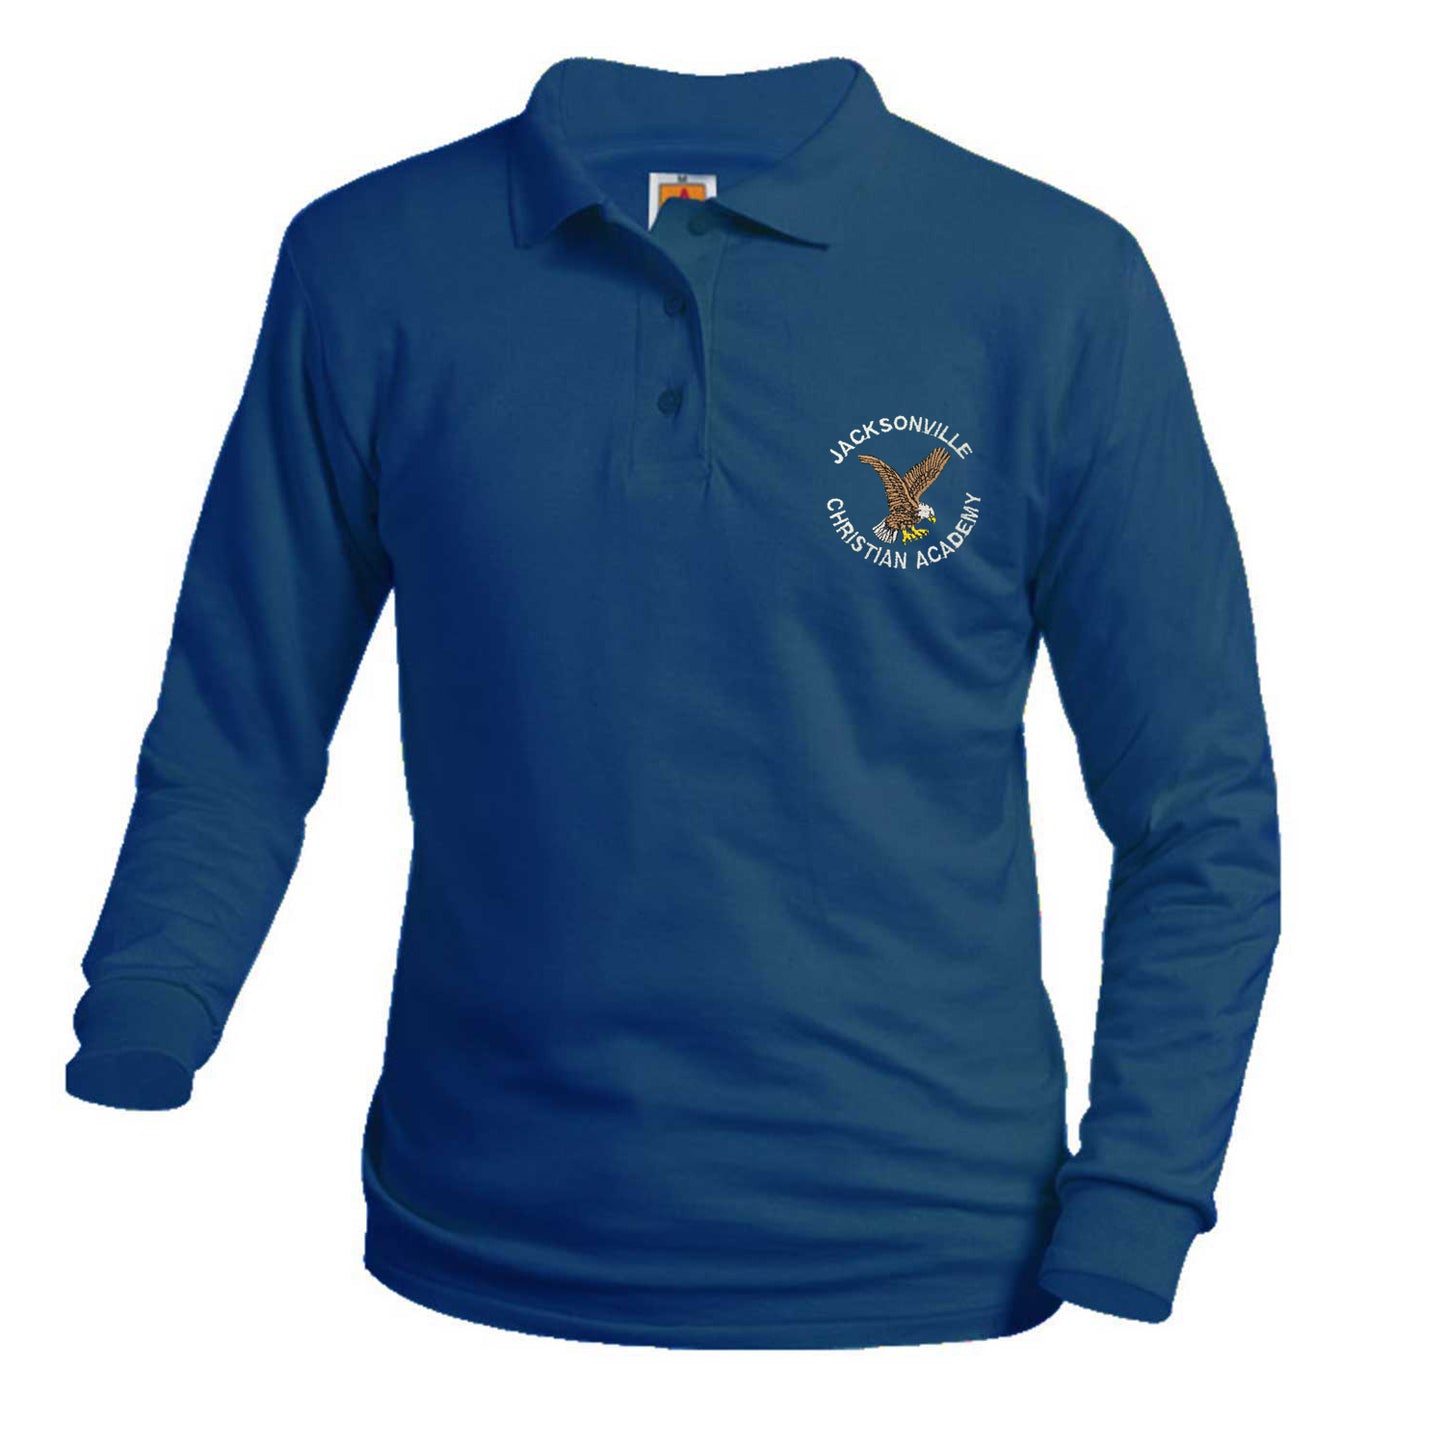 Adult Long Sleeve Smooth Polo With Jacksonville Christian Logo